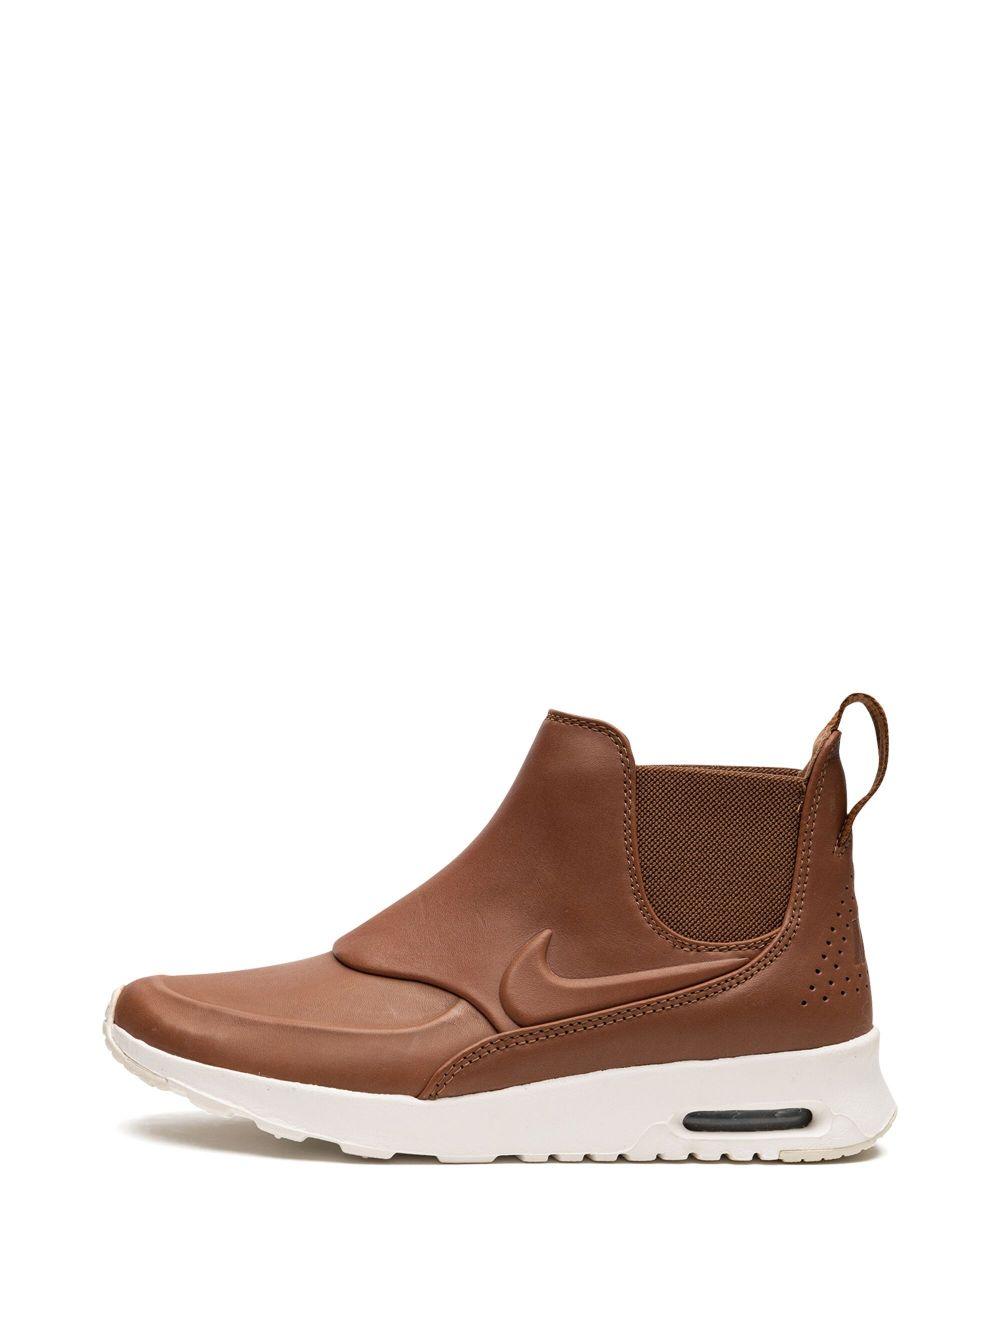 Nike Air Max Thea Mid "ale Brown" Sneakers | Lyst